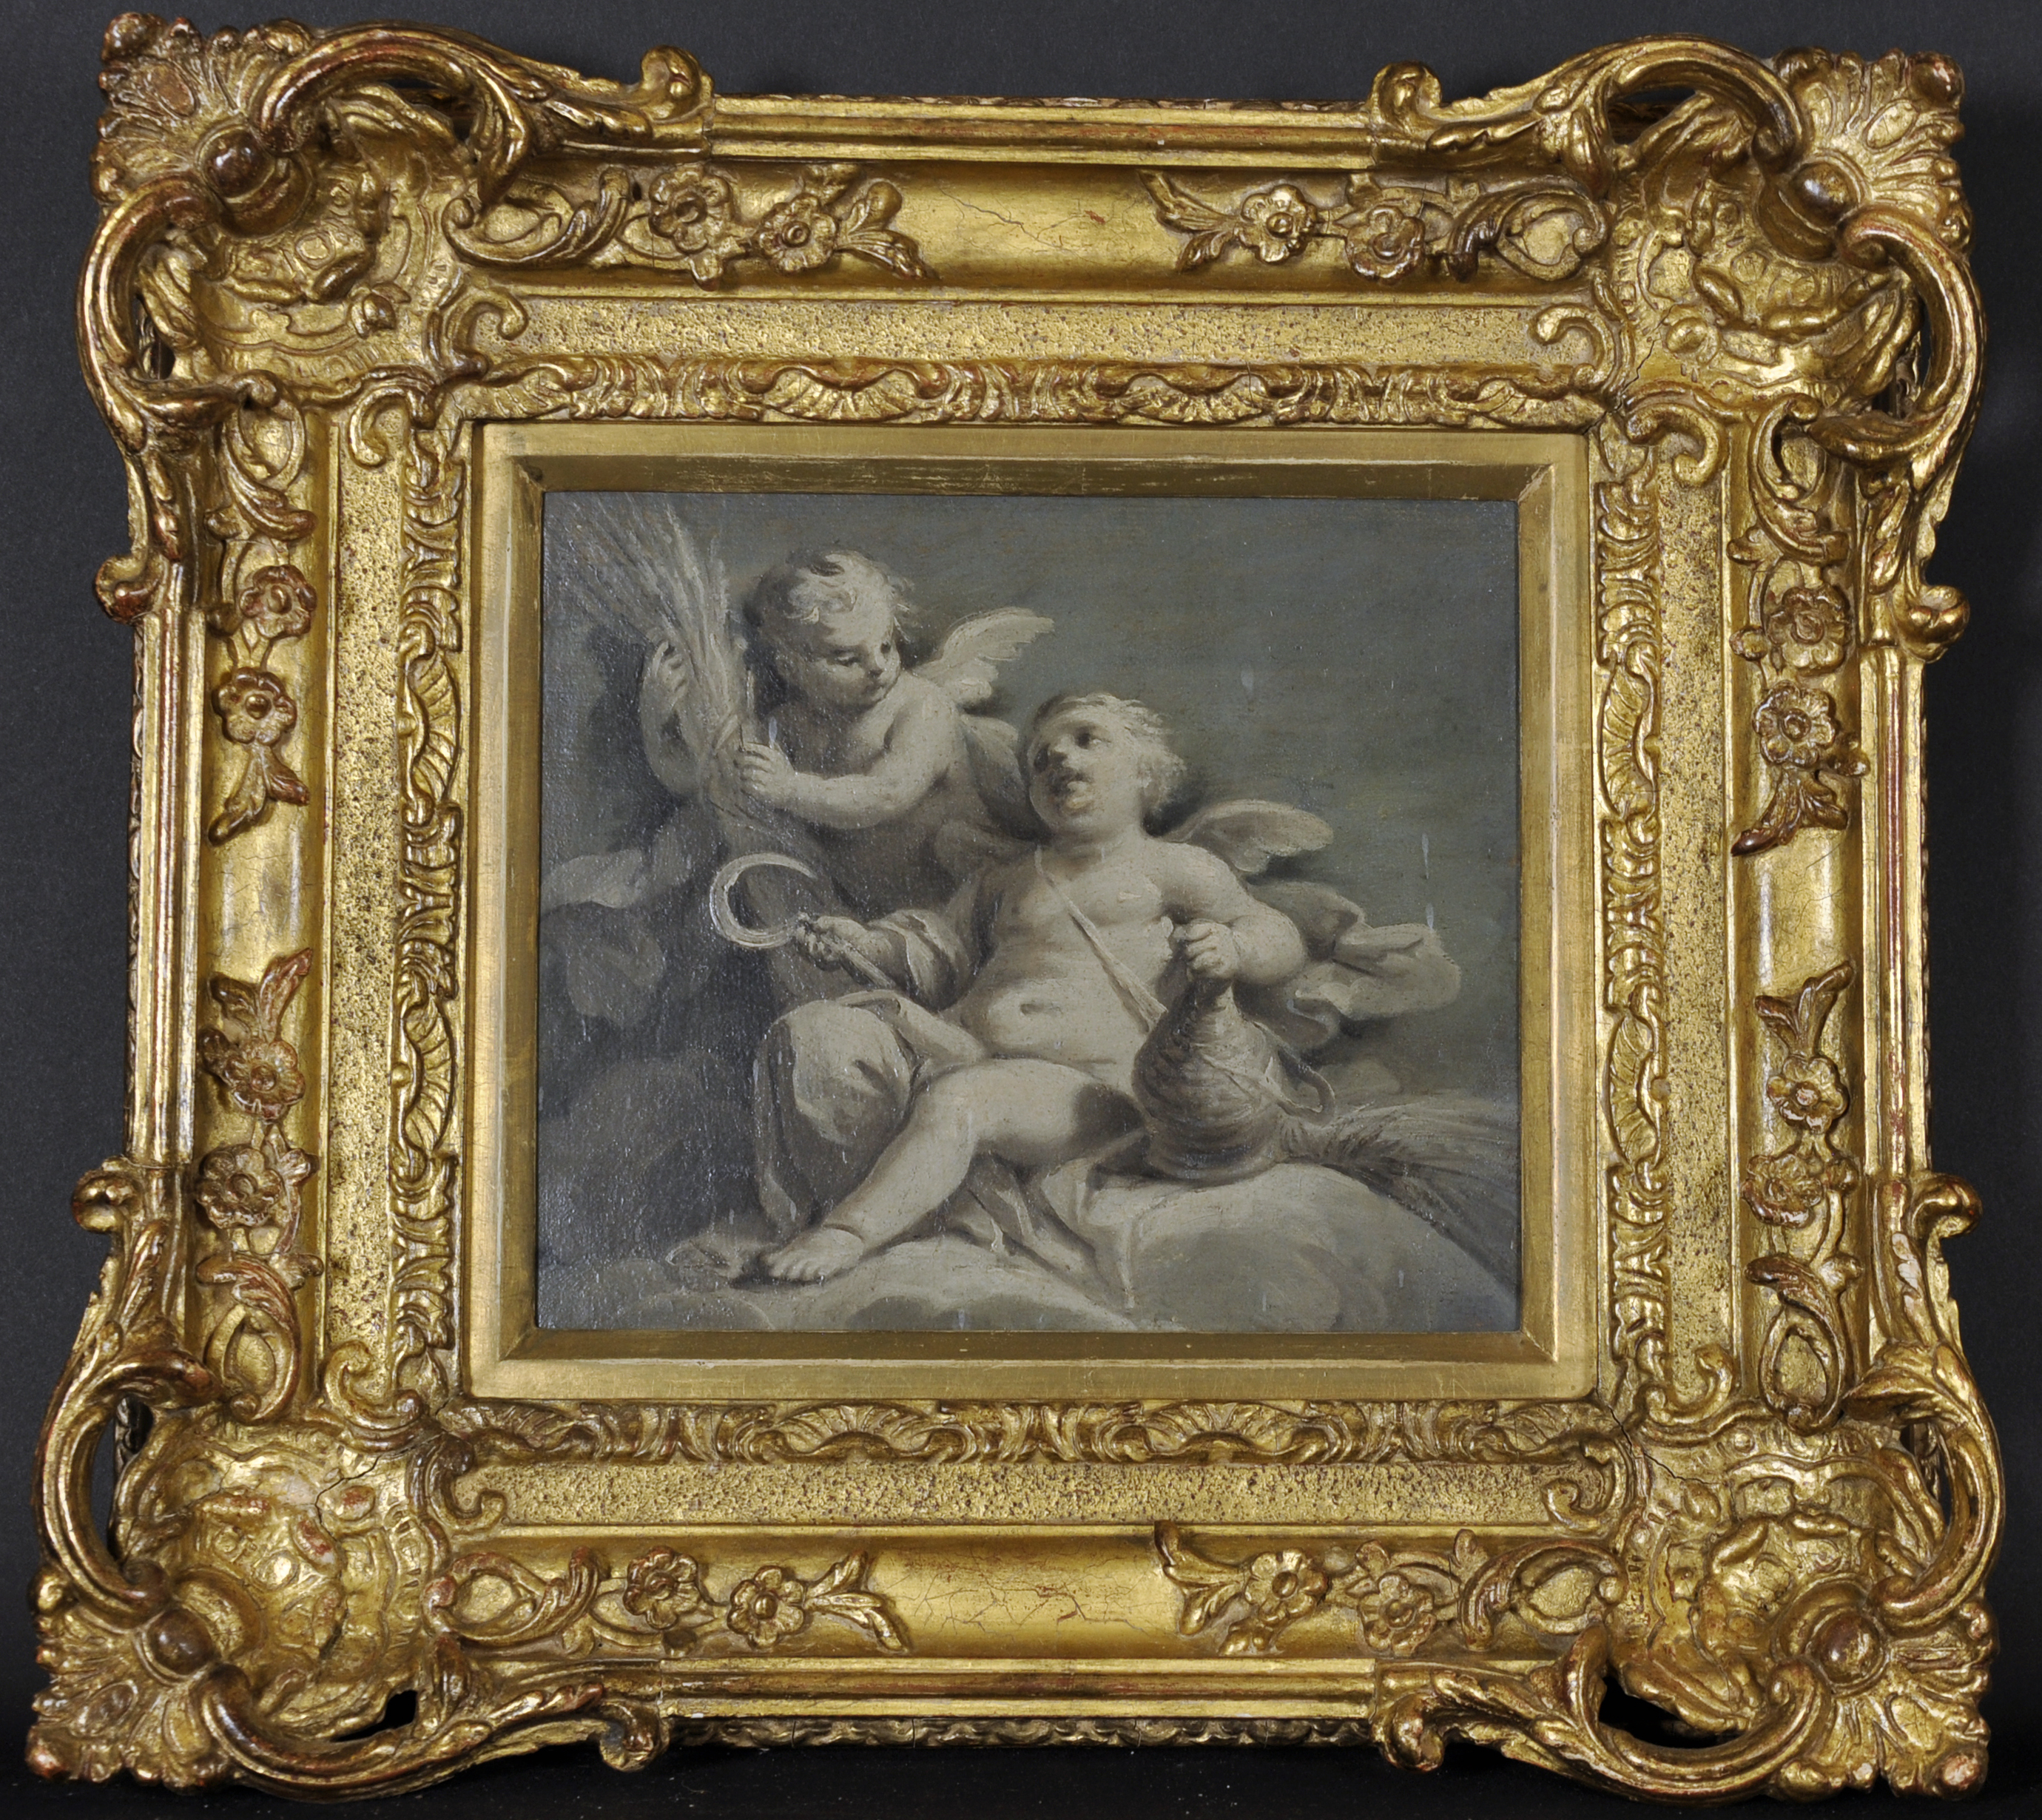 Jacob de Wit (c.1695-1754) Dutch. Allegory of Spring, with Putti, En Grisaille on Canvas, In a